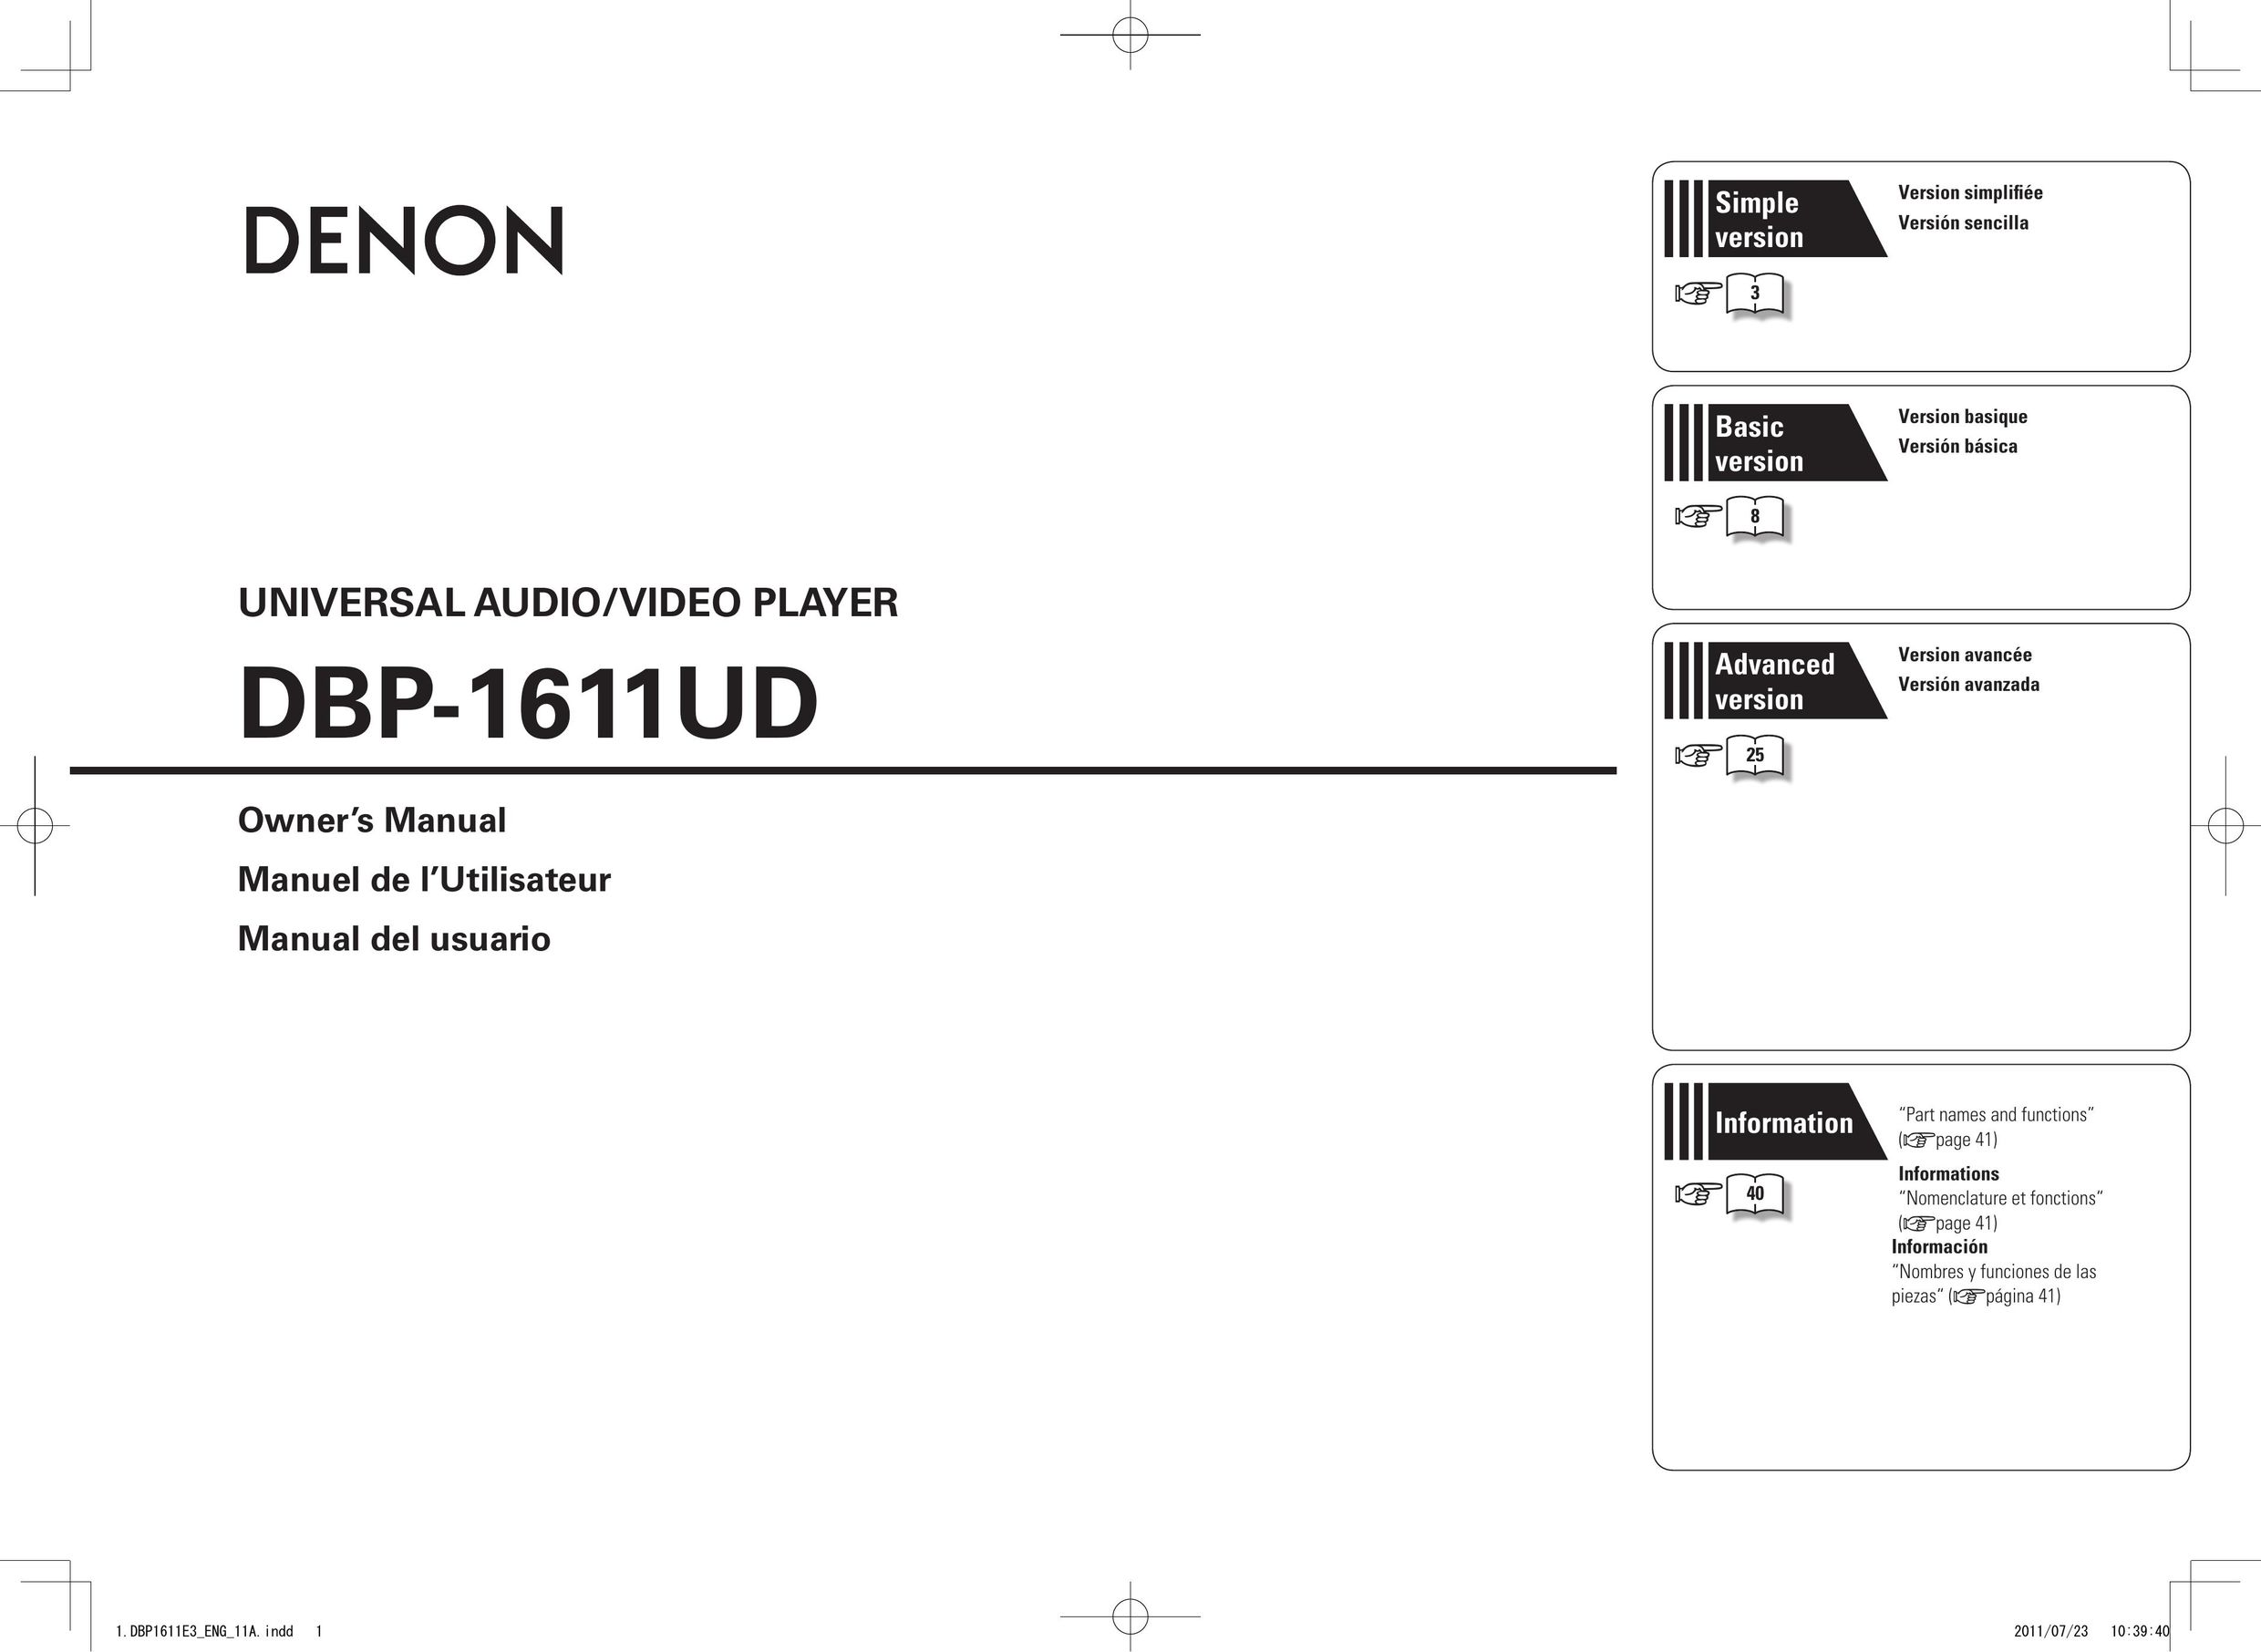 Denon DBP-1611UD DVD Player User Manual